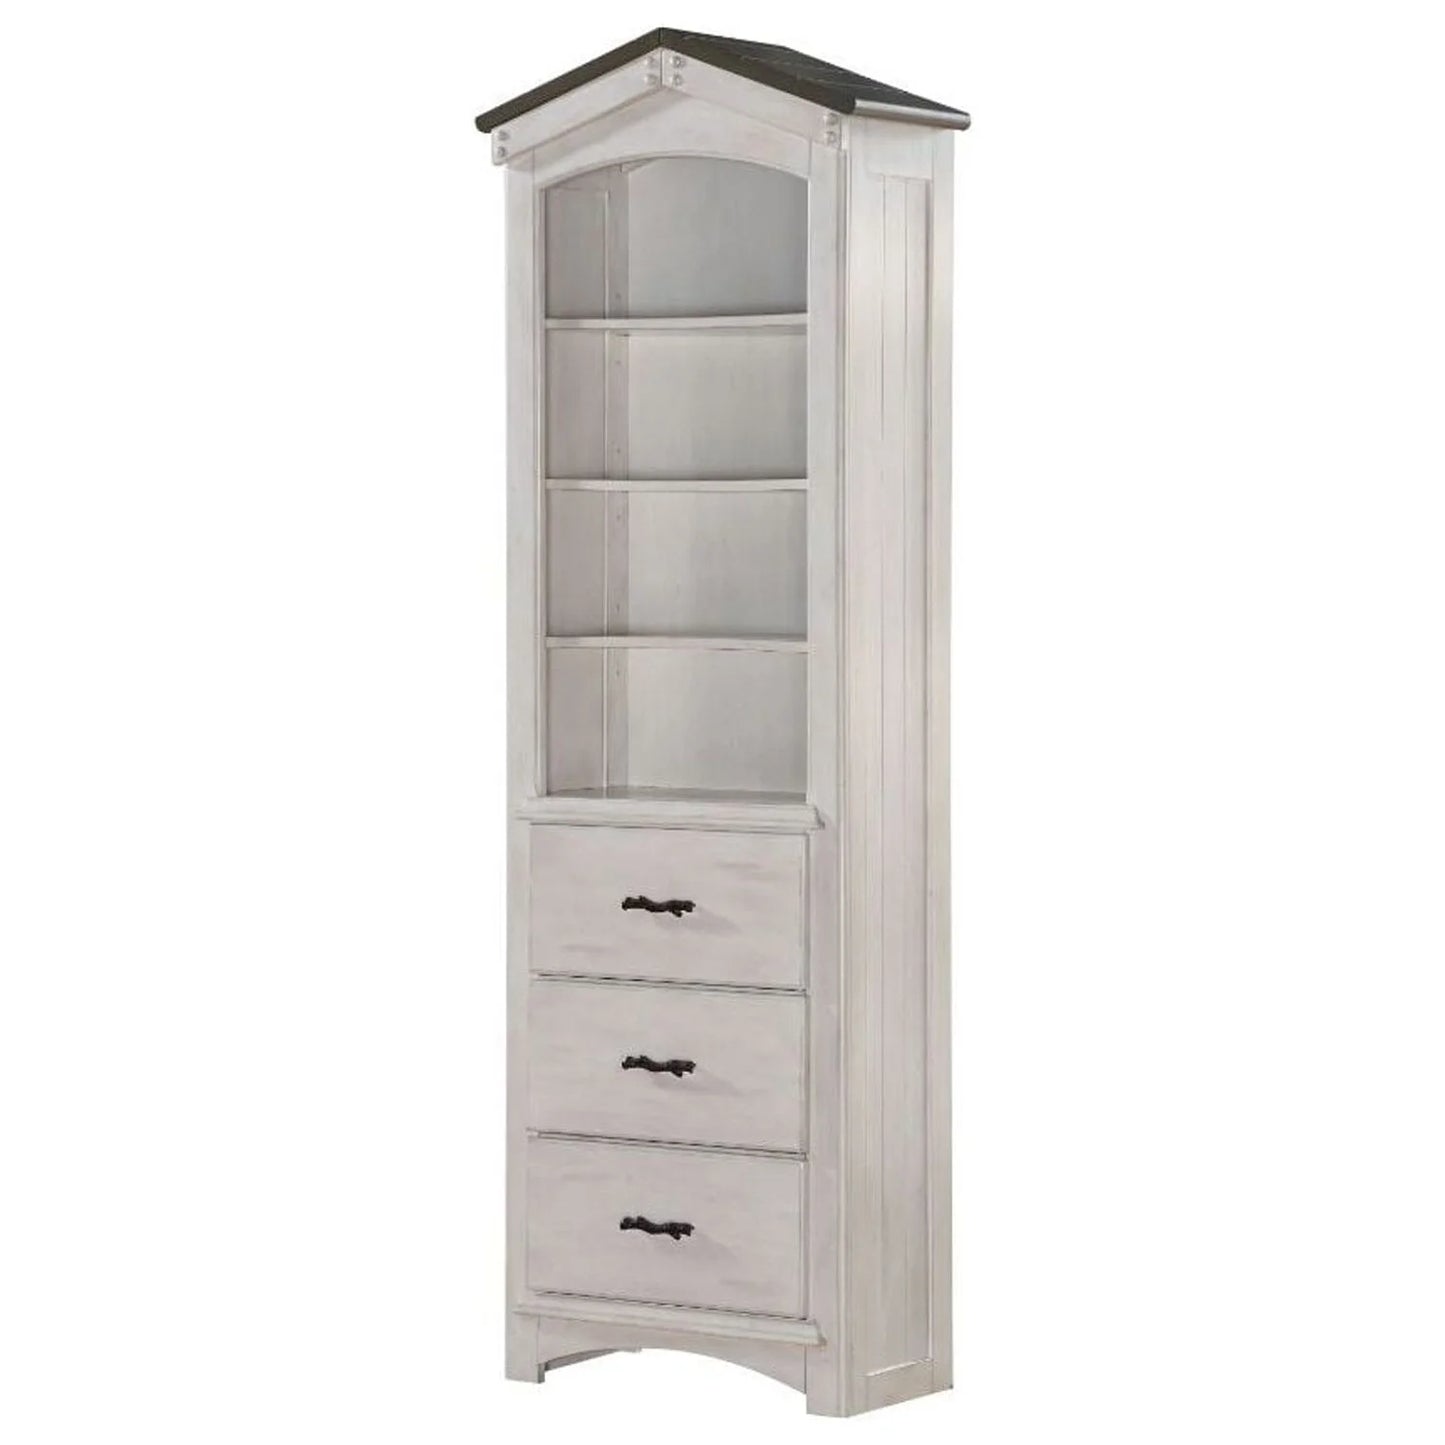 ACME Tree House Bookcase Cabinet in Weathered White and Washed Gray